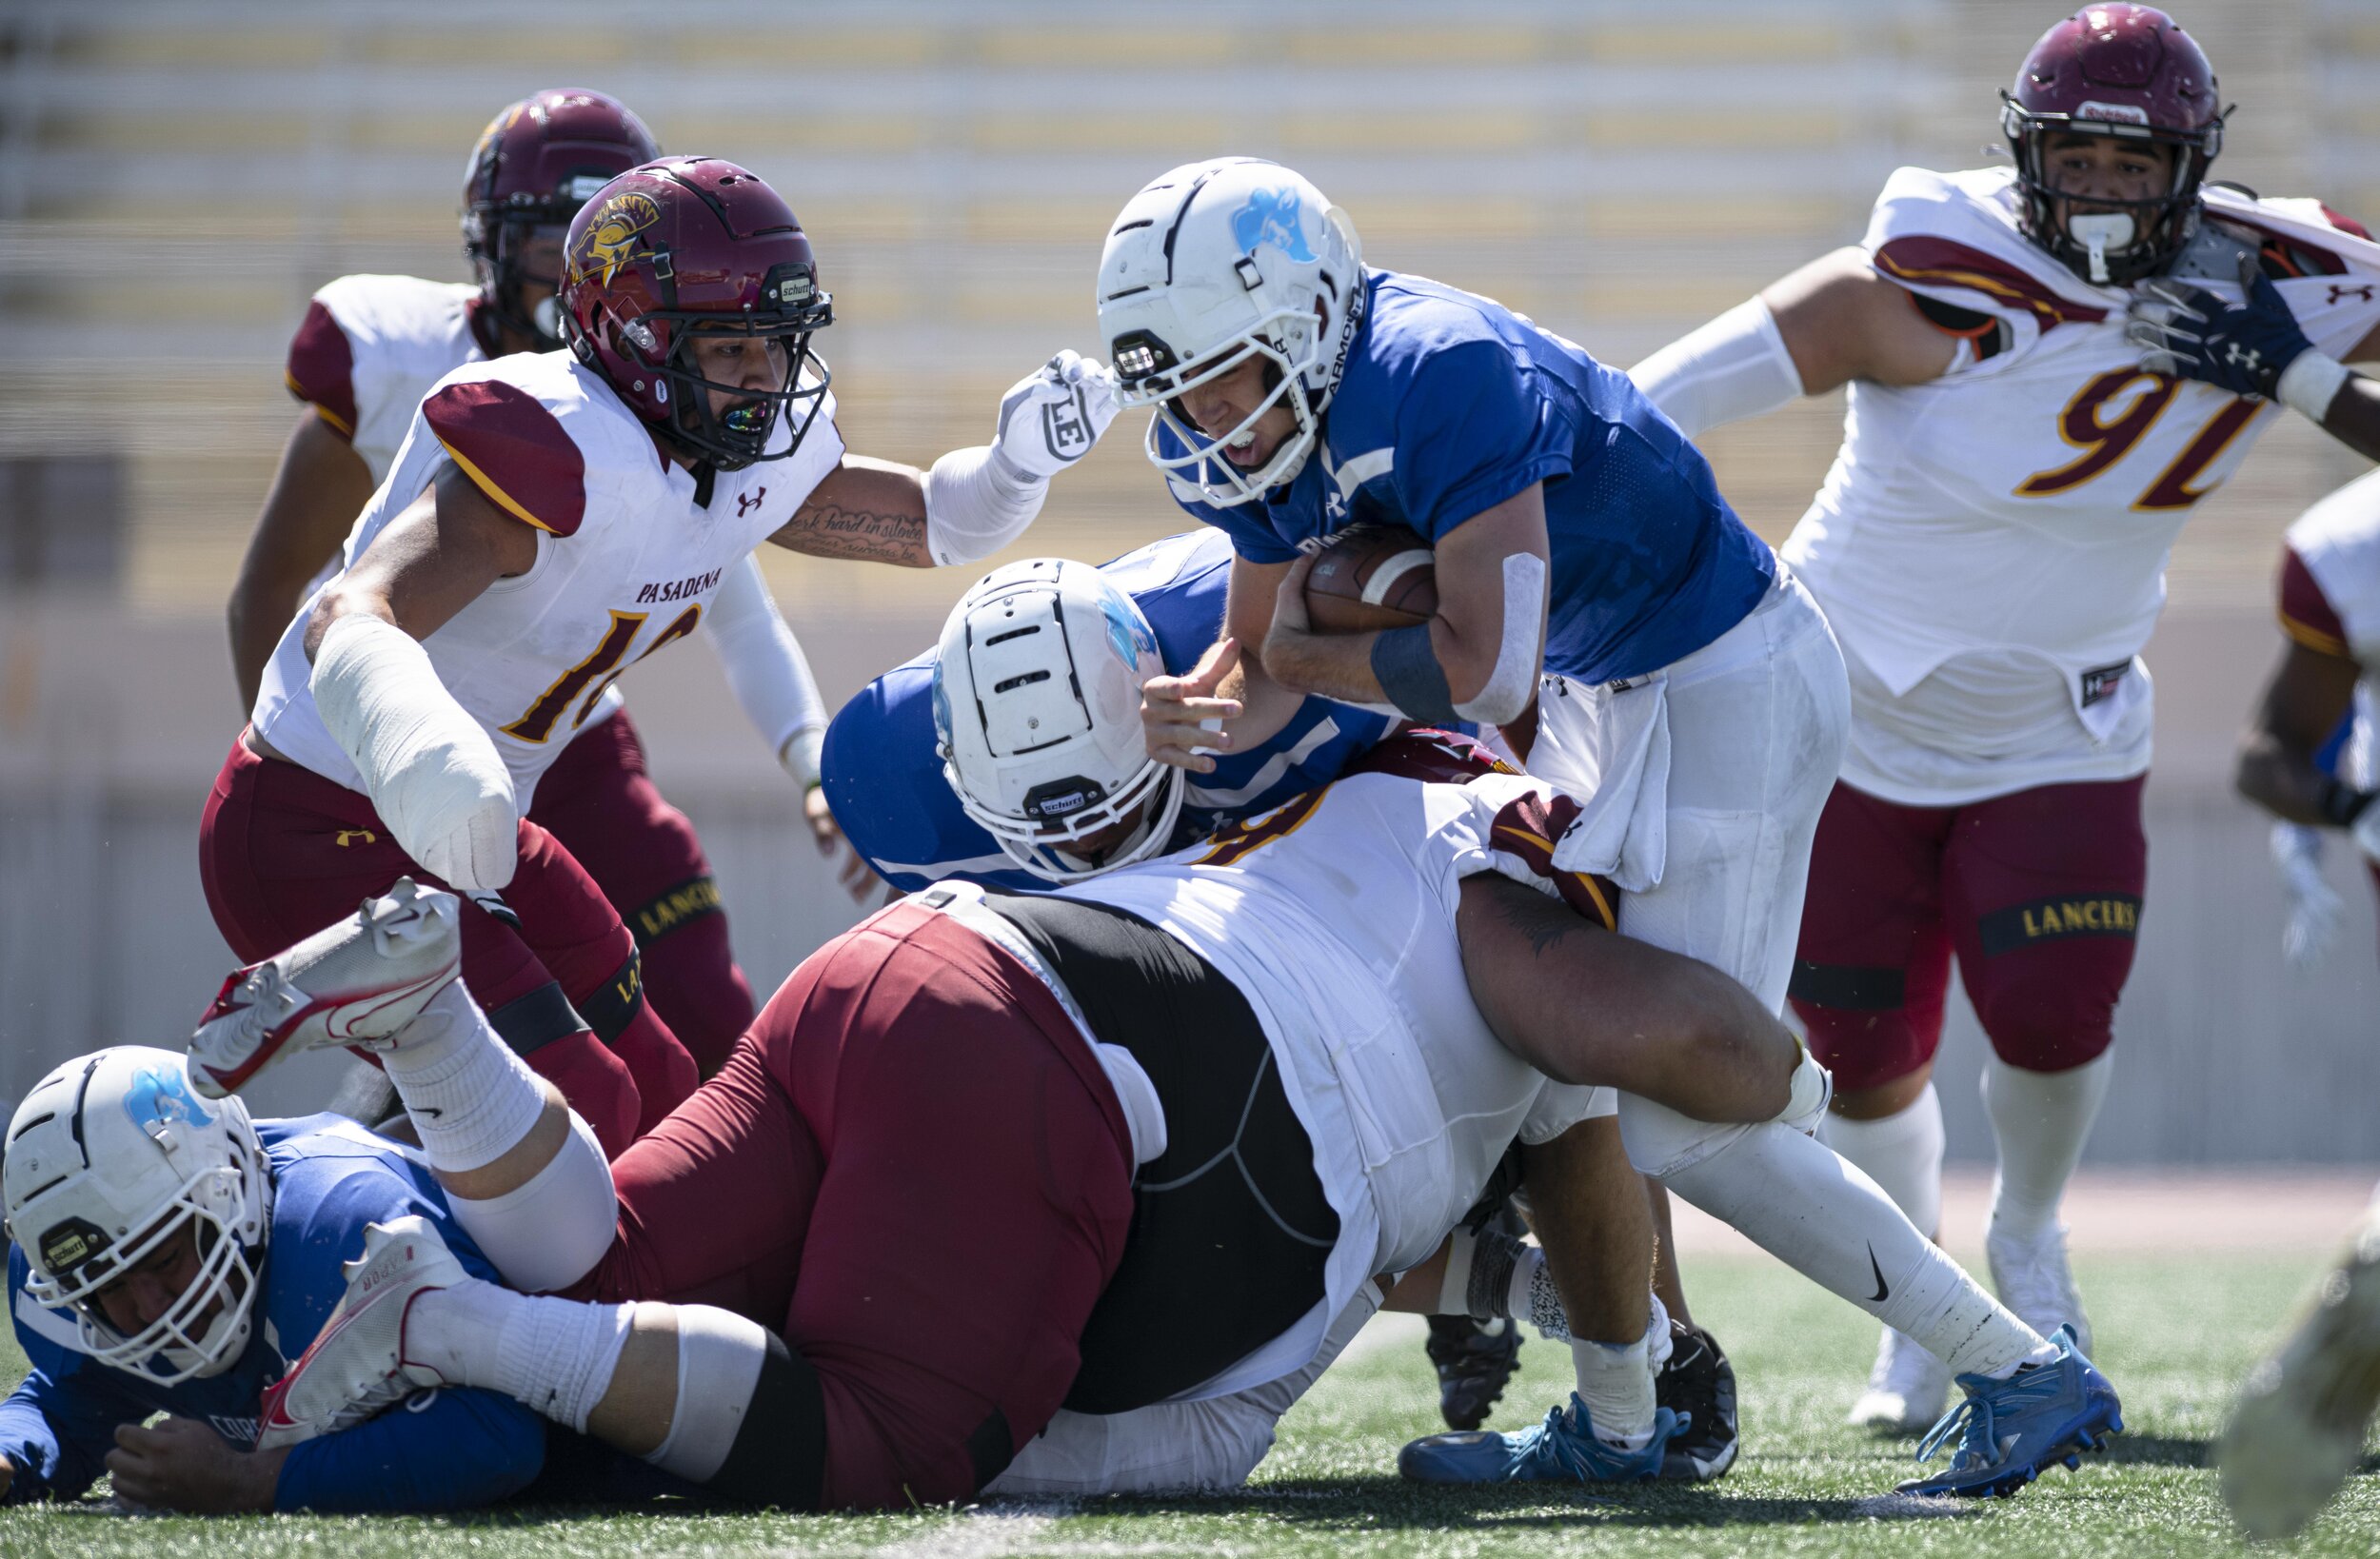  SMC freshman QB Sam Vaulton (14) pushes for every yard while being tackled by defenders. (Jon Putman | The Corsair) 